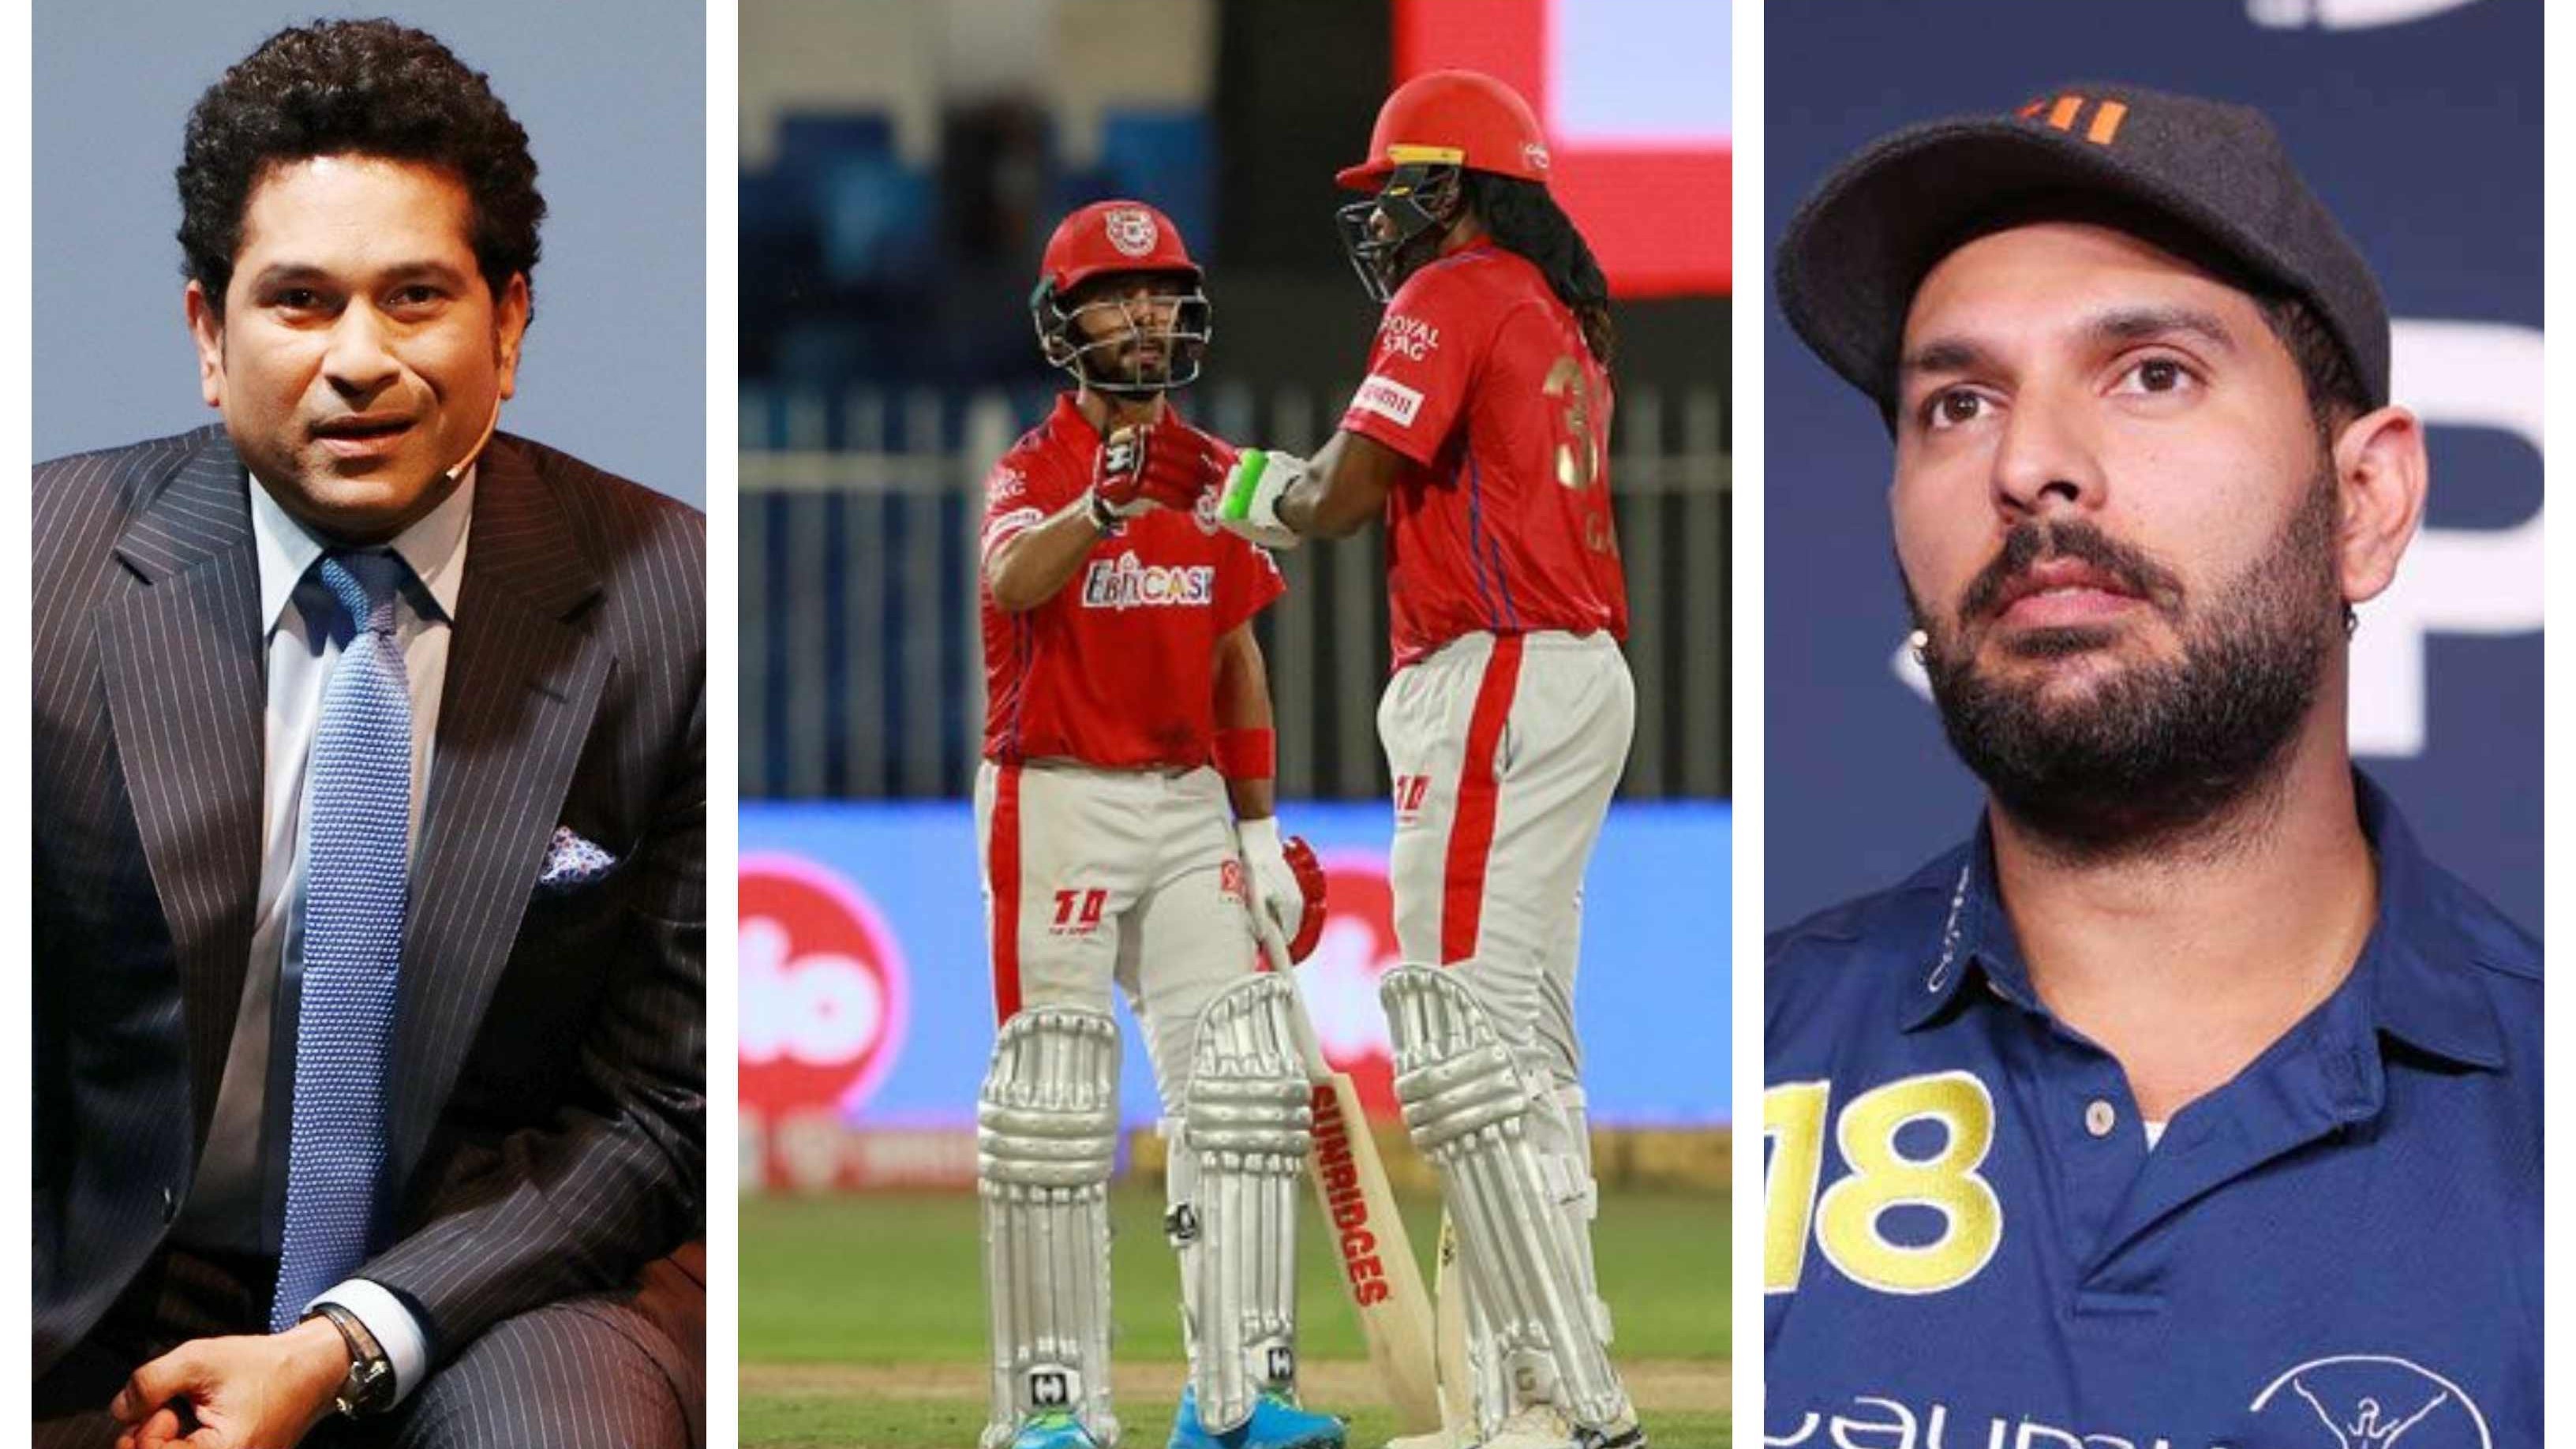 IPL 2020: Cricket fraternity reacts as Mandeep Singh's 66* powers KXIP to 8-wicket win over KKR